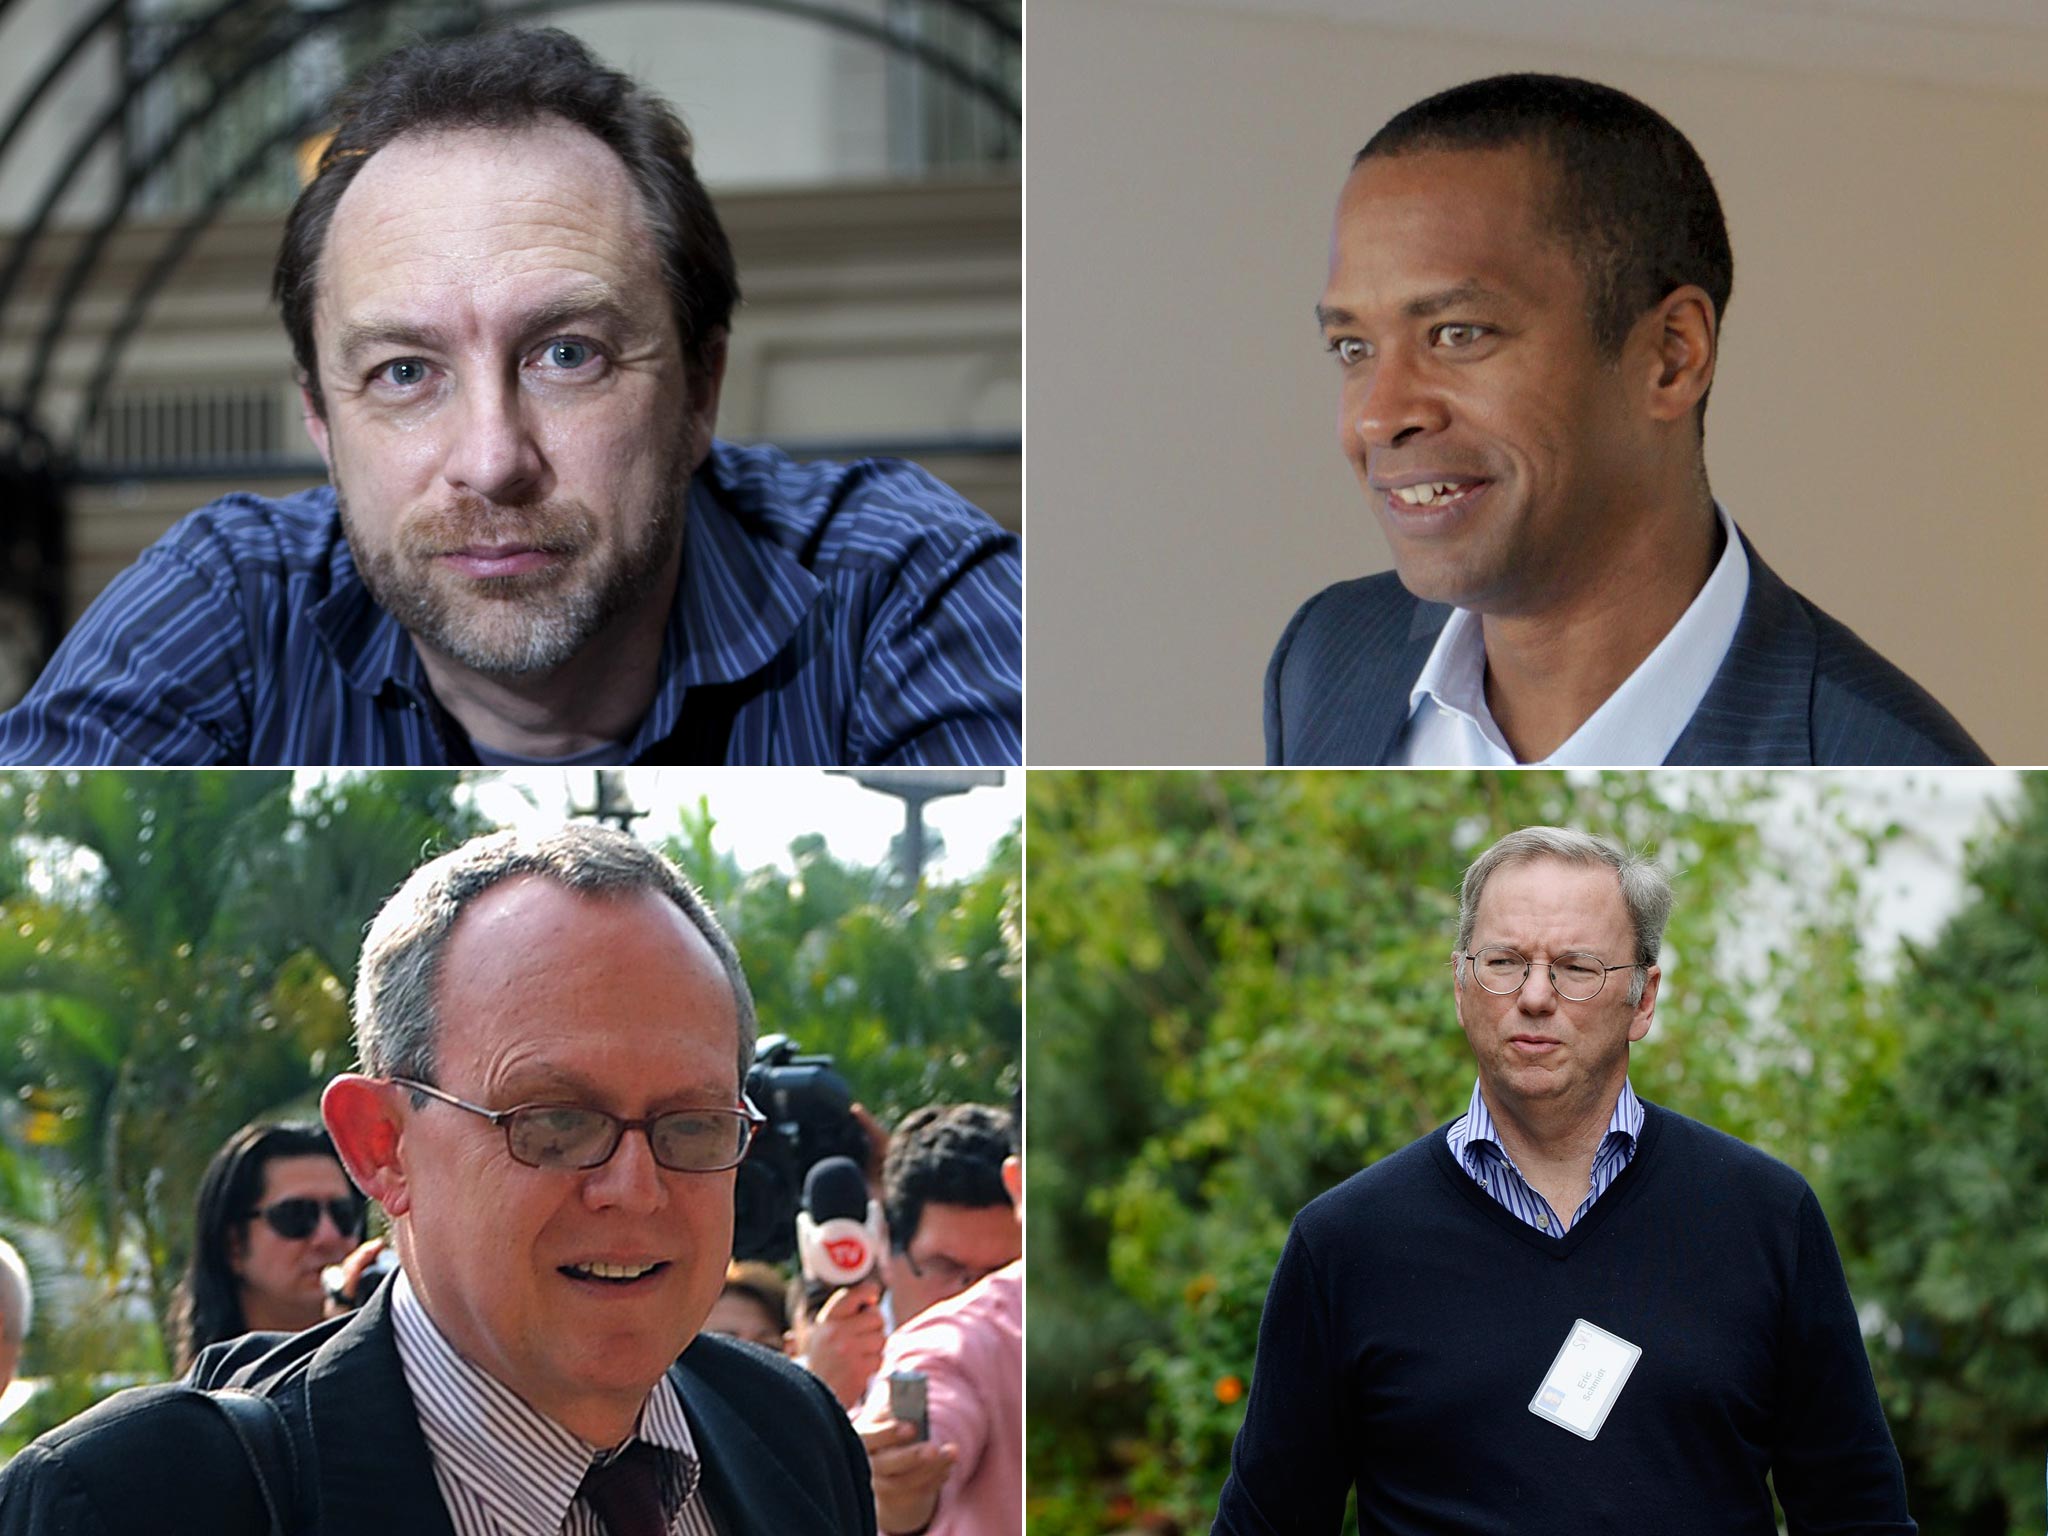 On Google’s advisory panel: (clockwise from top left) Jimmy Wales, Wikipedia co-founder; David Drummond, Google senior vice president; Eric Schmidt, Google chairman; Frank La Rue, UN special
rapporteur on freedom of expression